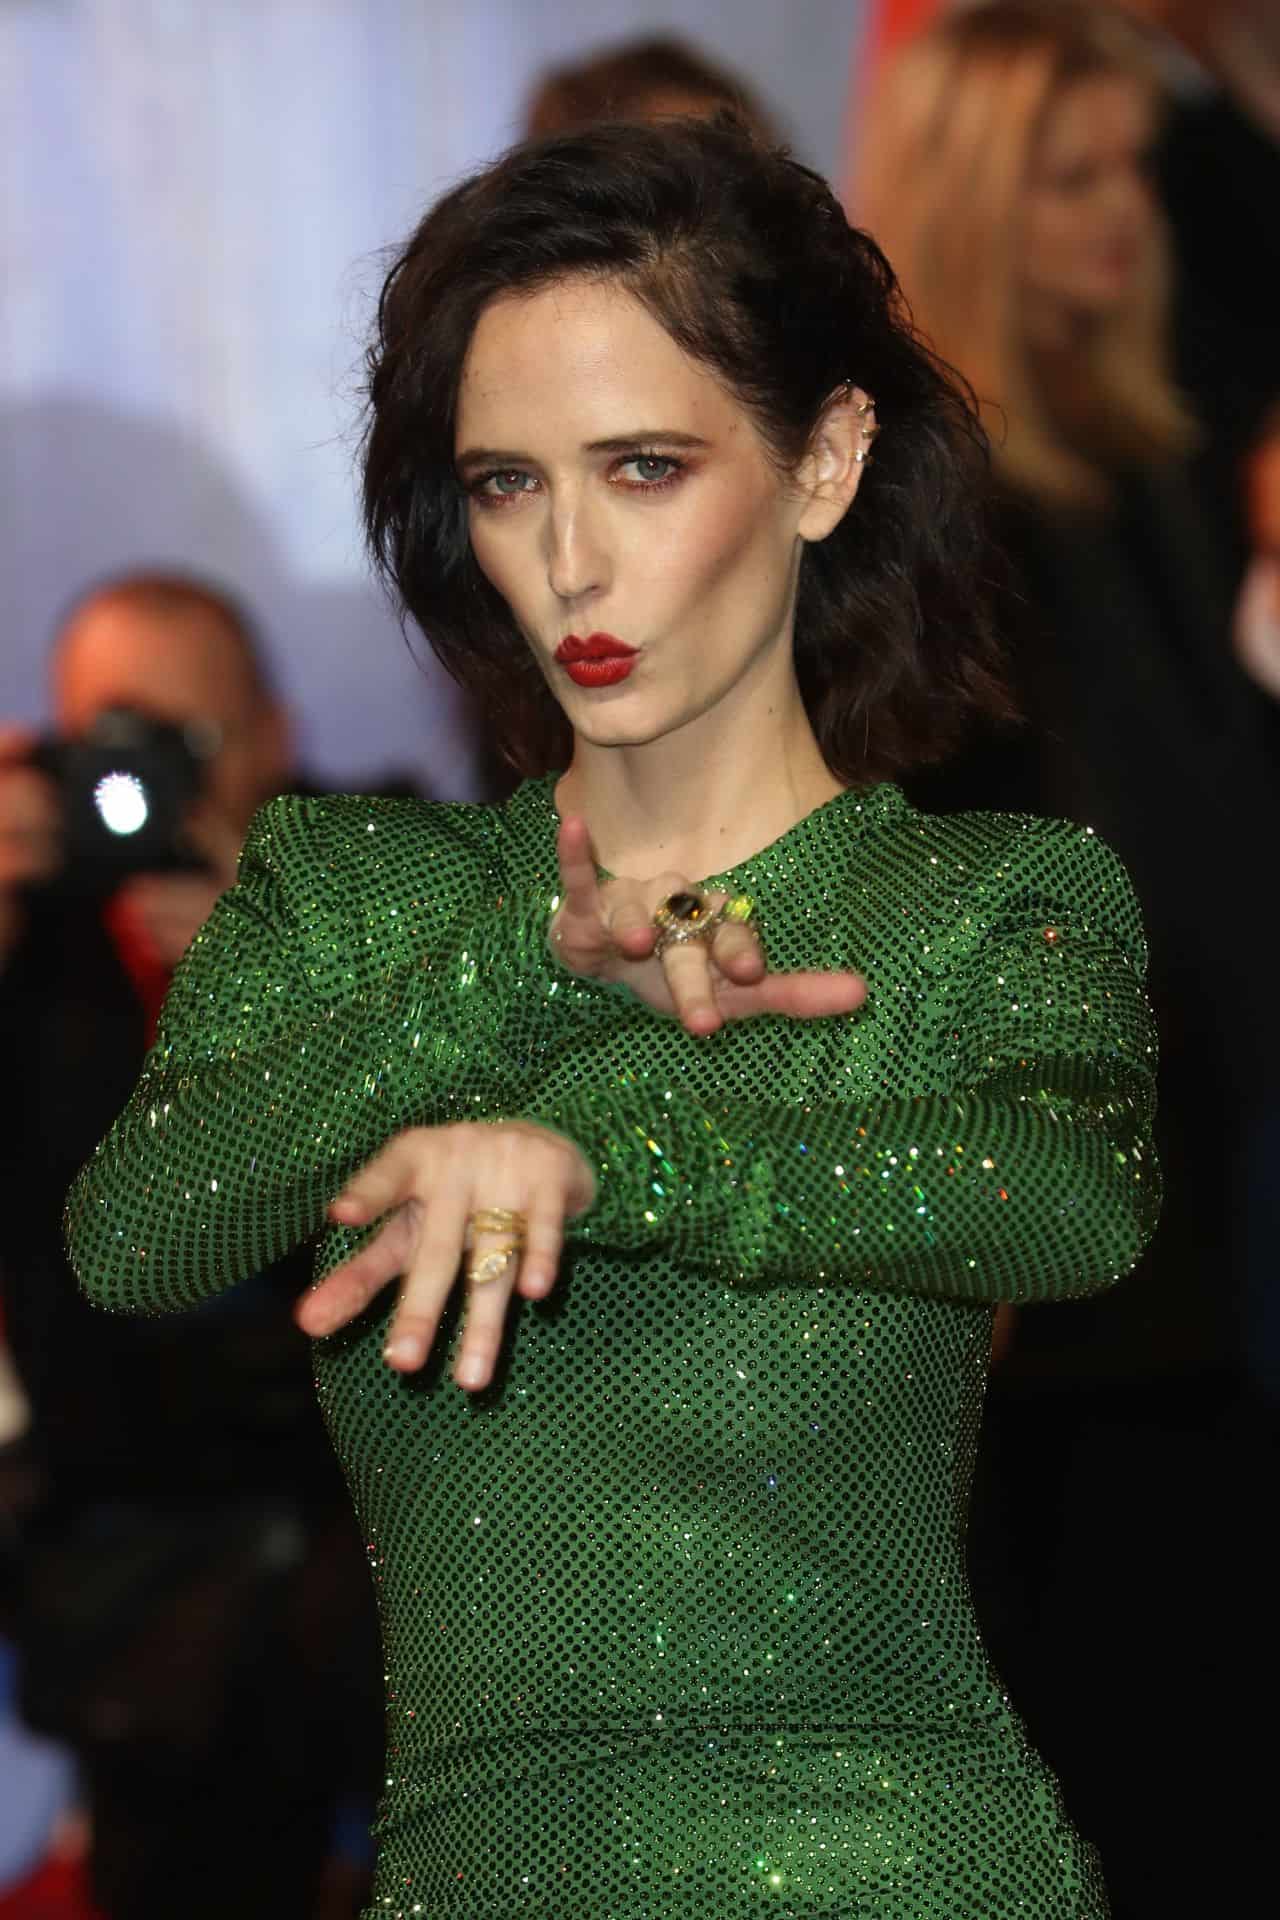 Eva Green Lights Up the Red Carpet in Emerald Green Gown